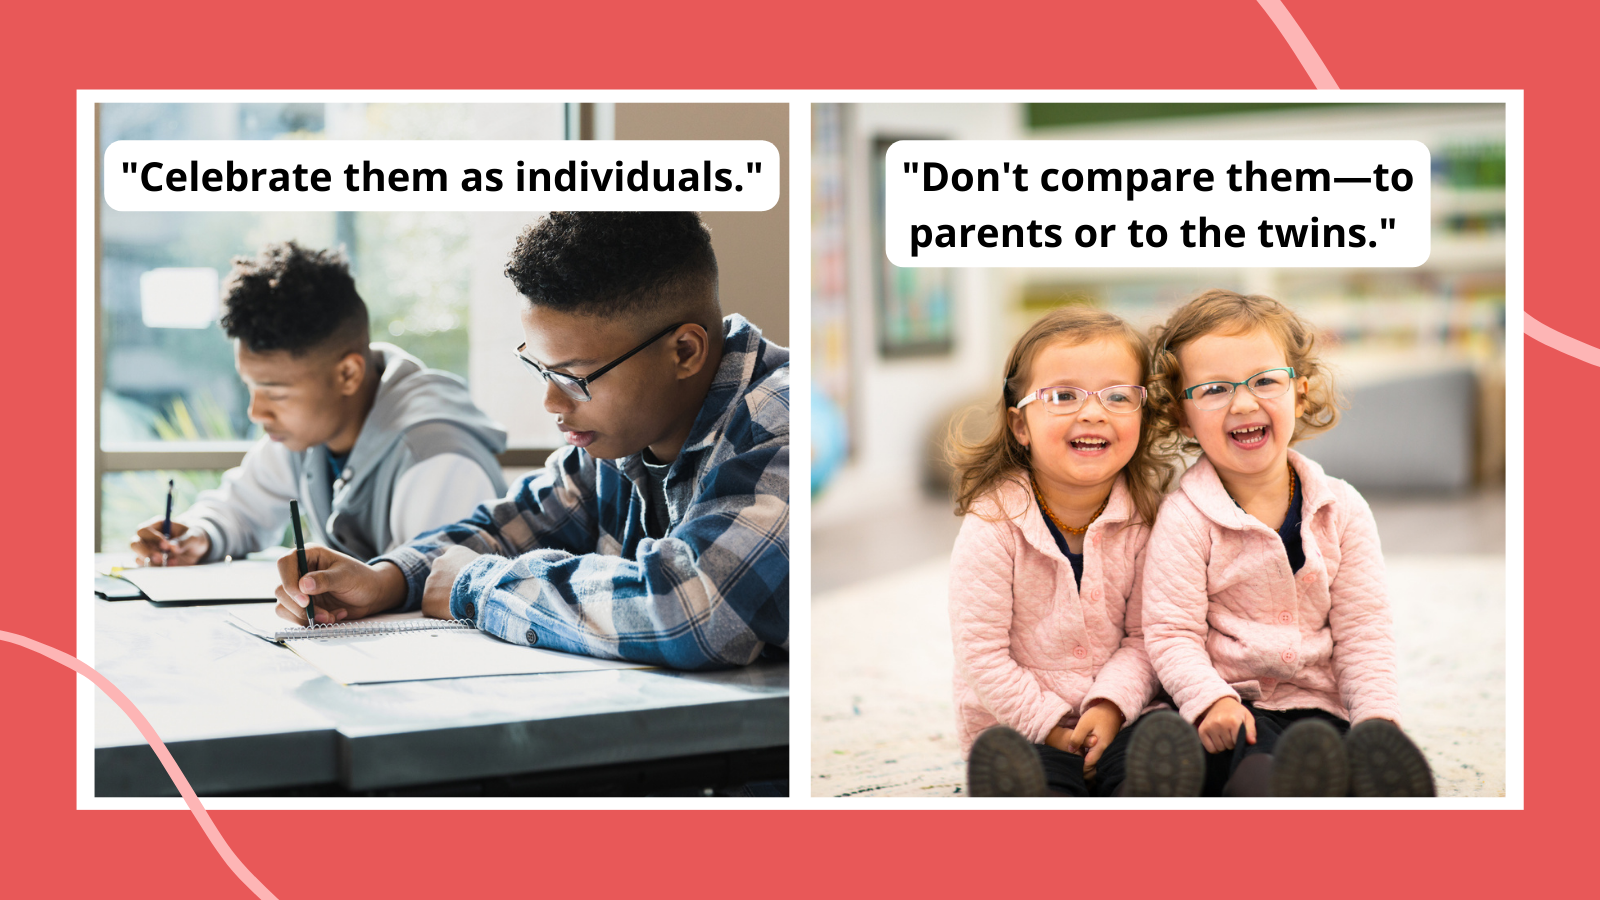 Paired images of twins with advice about teaching twins